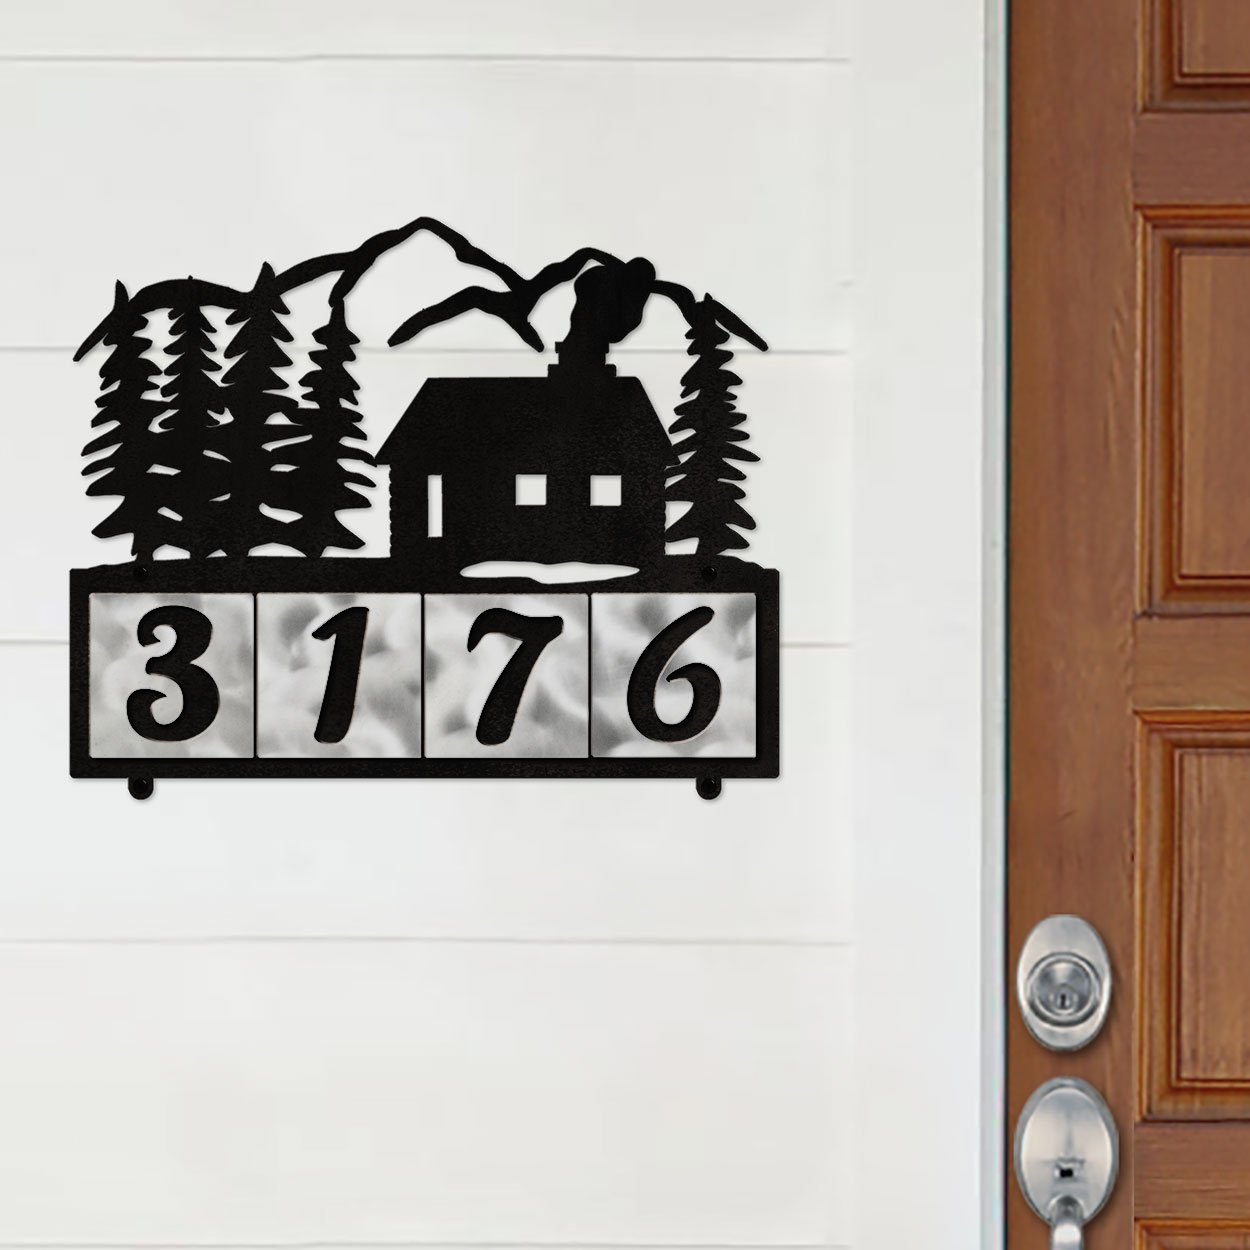 609074 - XL Cabin in the Woods Design 4-Digit Horizontal 6in Tile Outdoor House Numbers